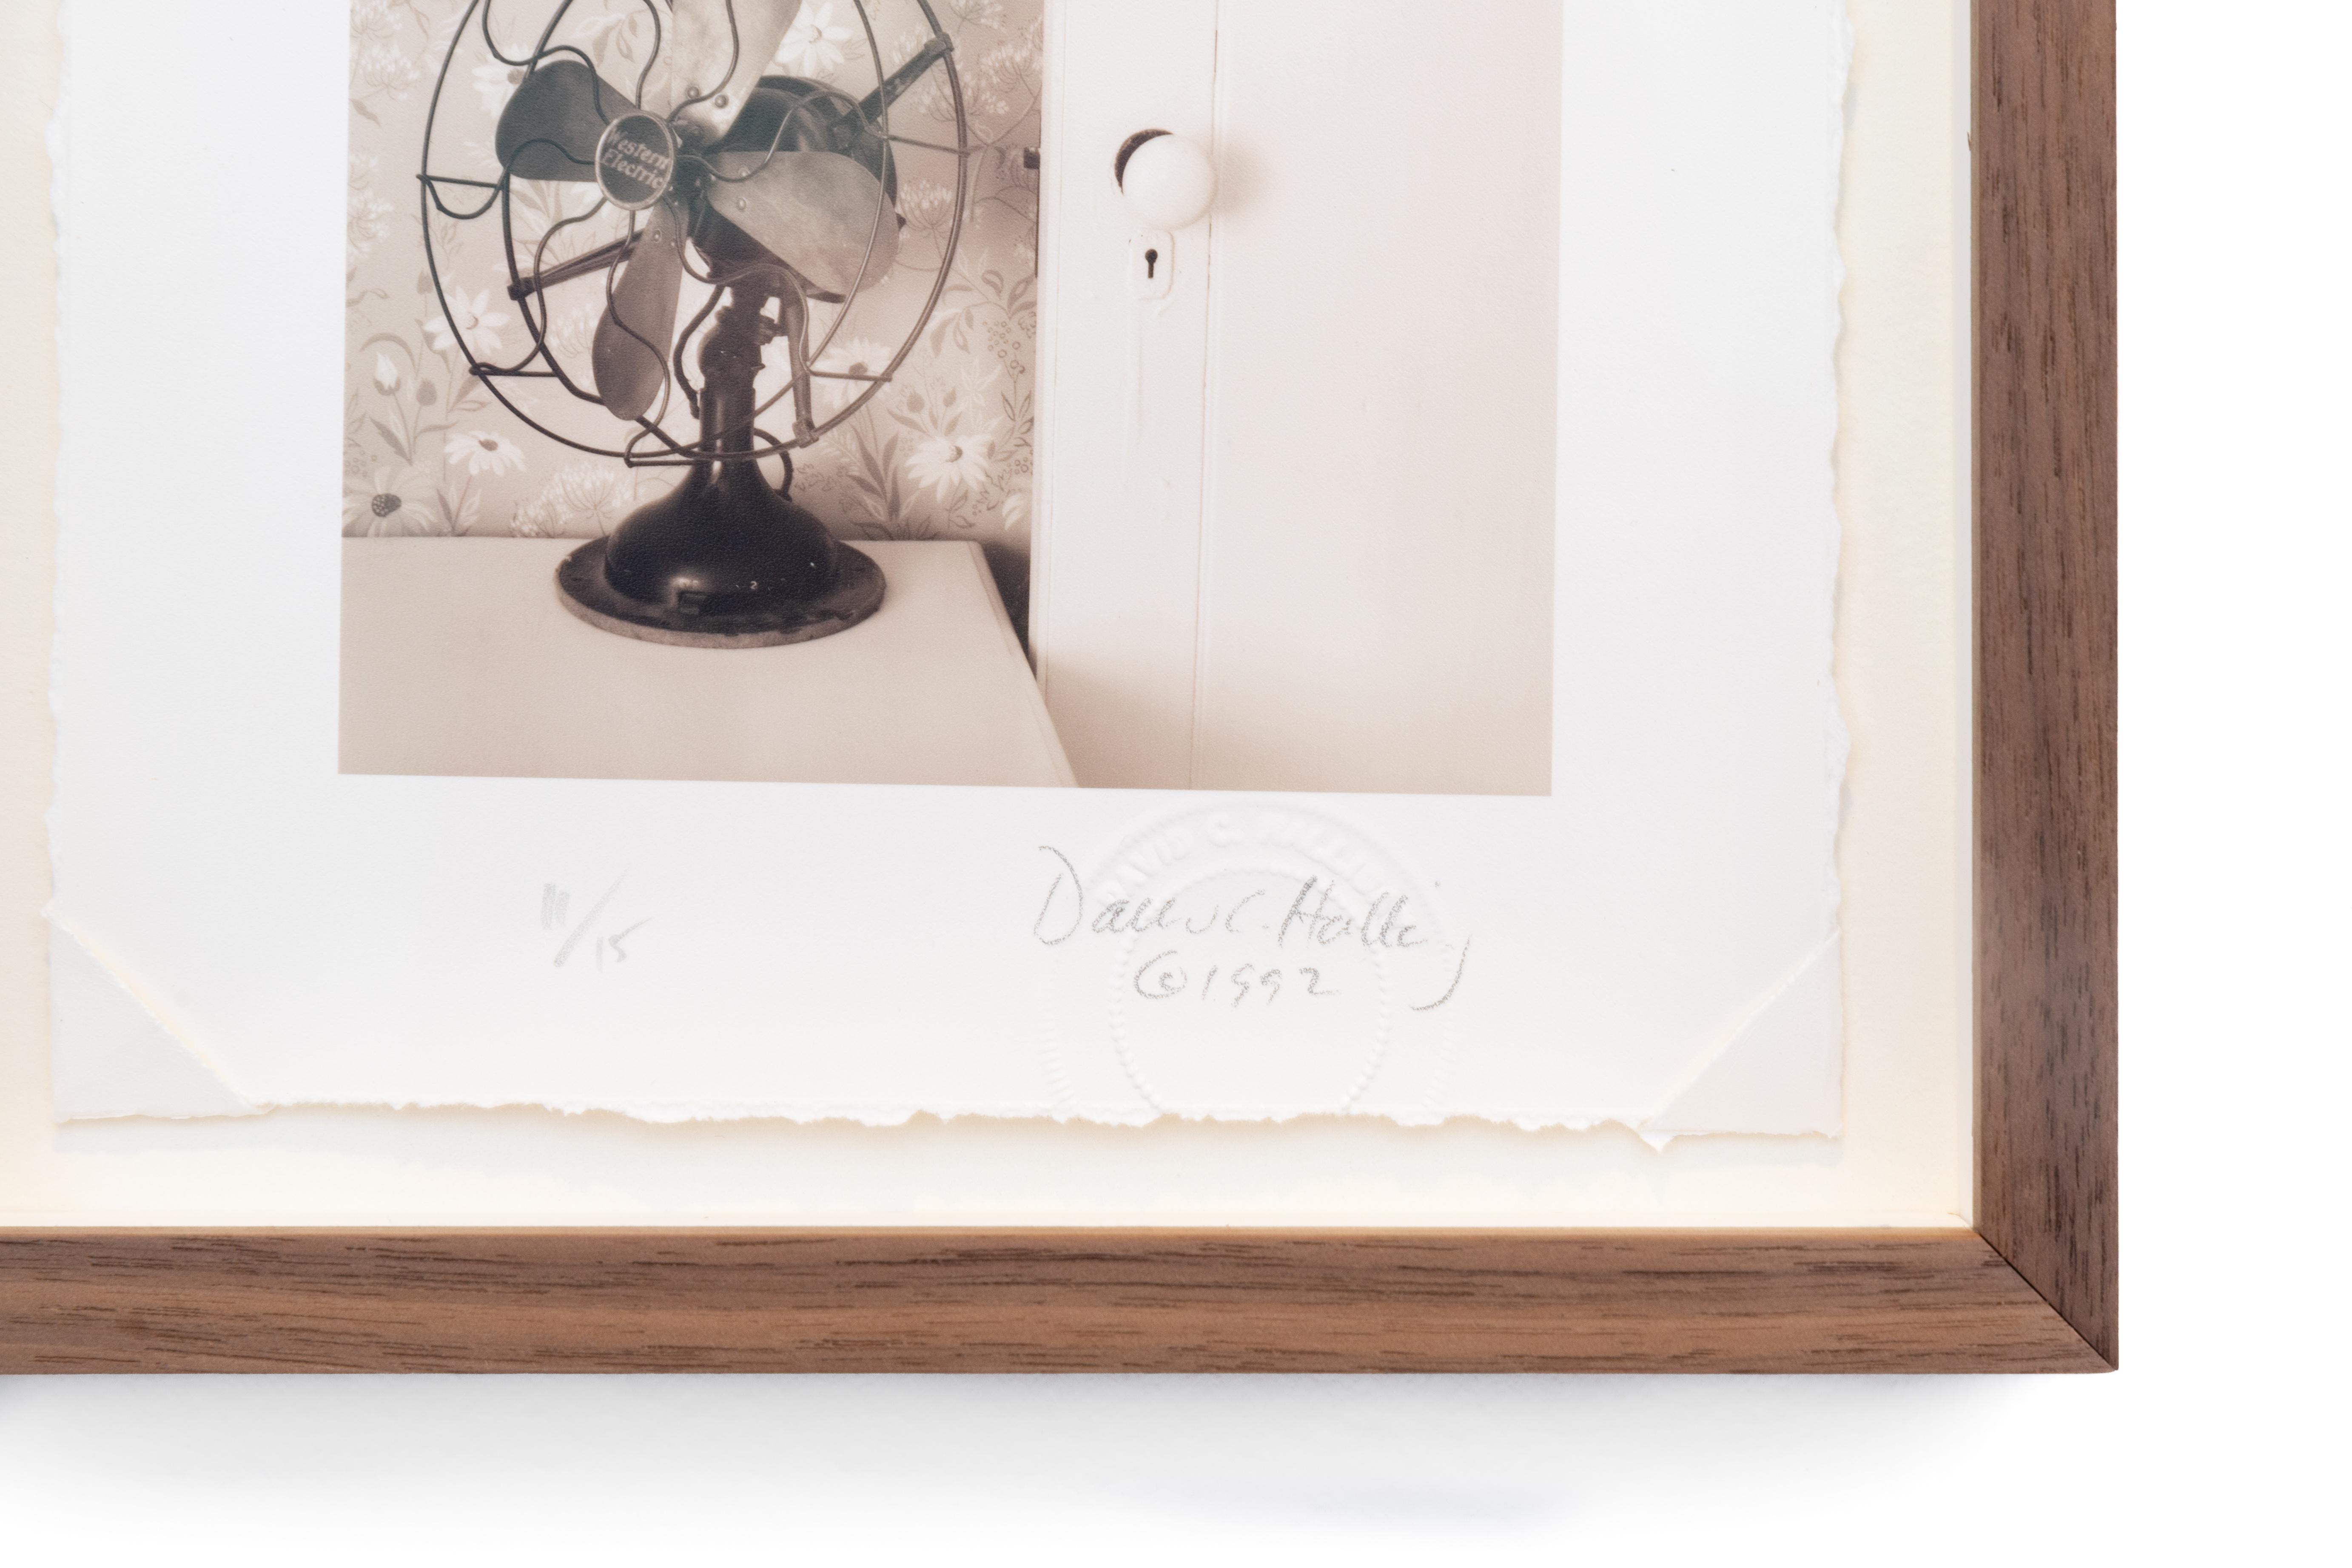 Fan (Sepia Toned Still Life Photograph of Vintage Western Electric Fan, Framed) - Beige Black and White Photograph by David Halliday